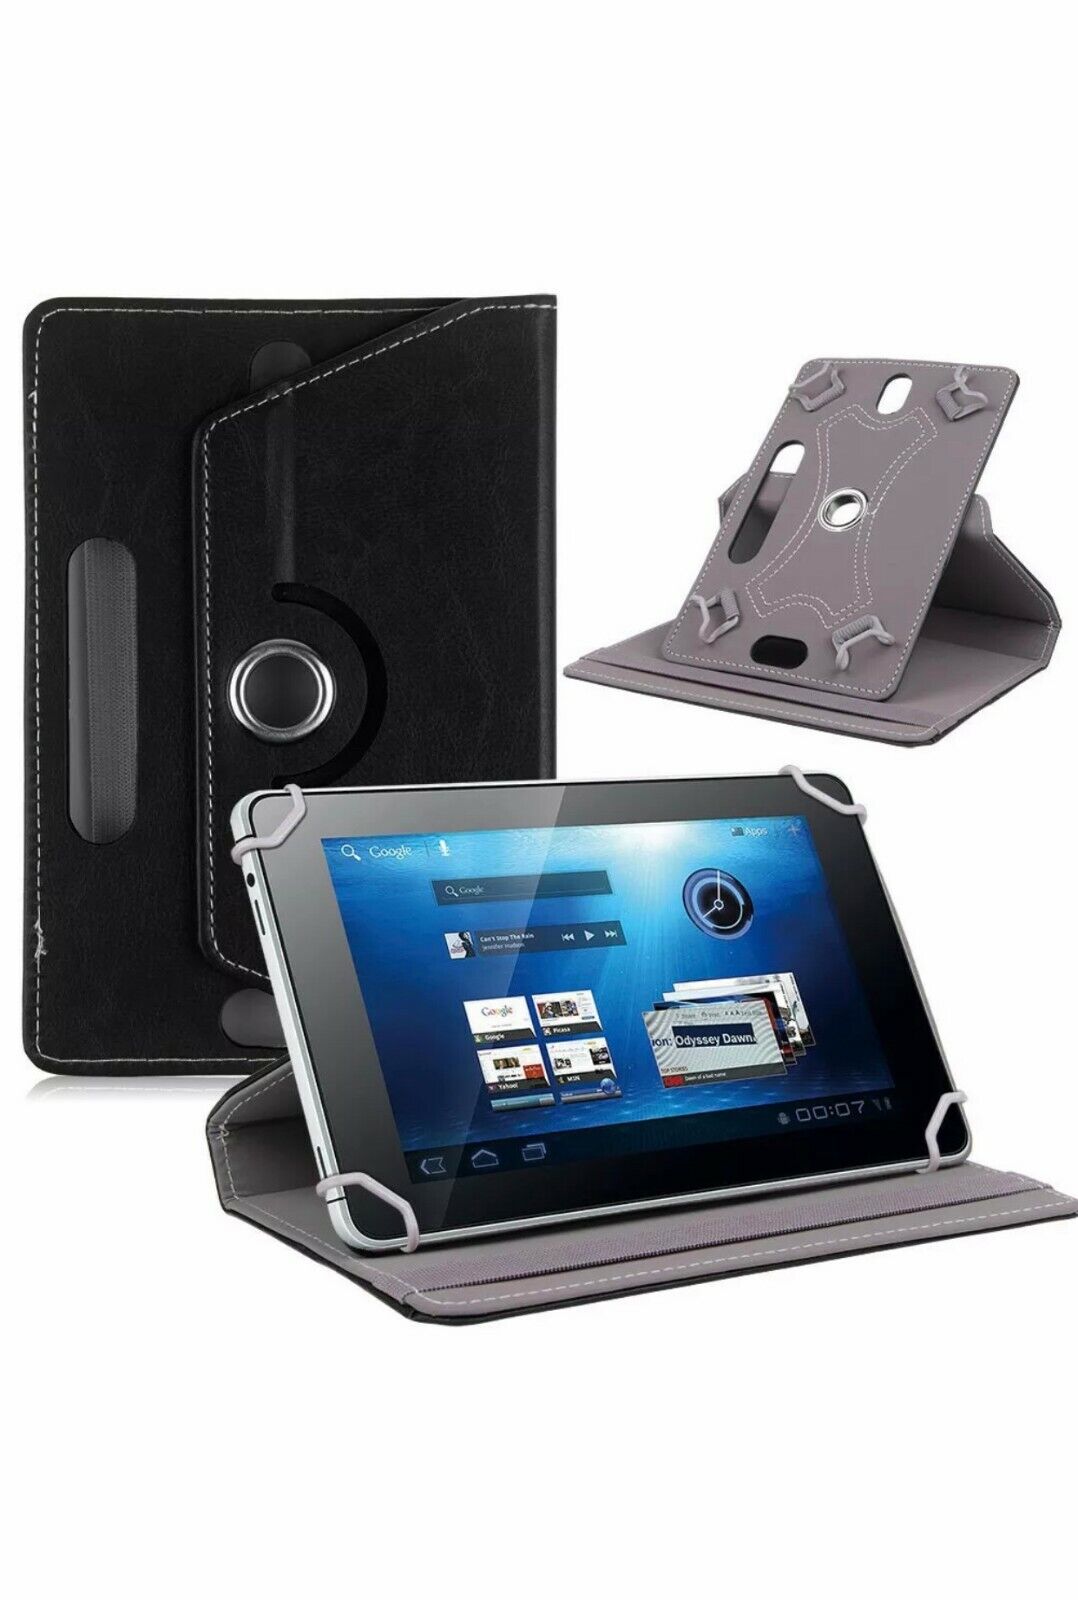 Hot 360° Folio Leather Case Cover Stand For Android Tablet PC 7